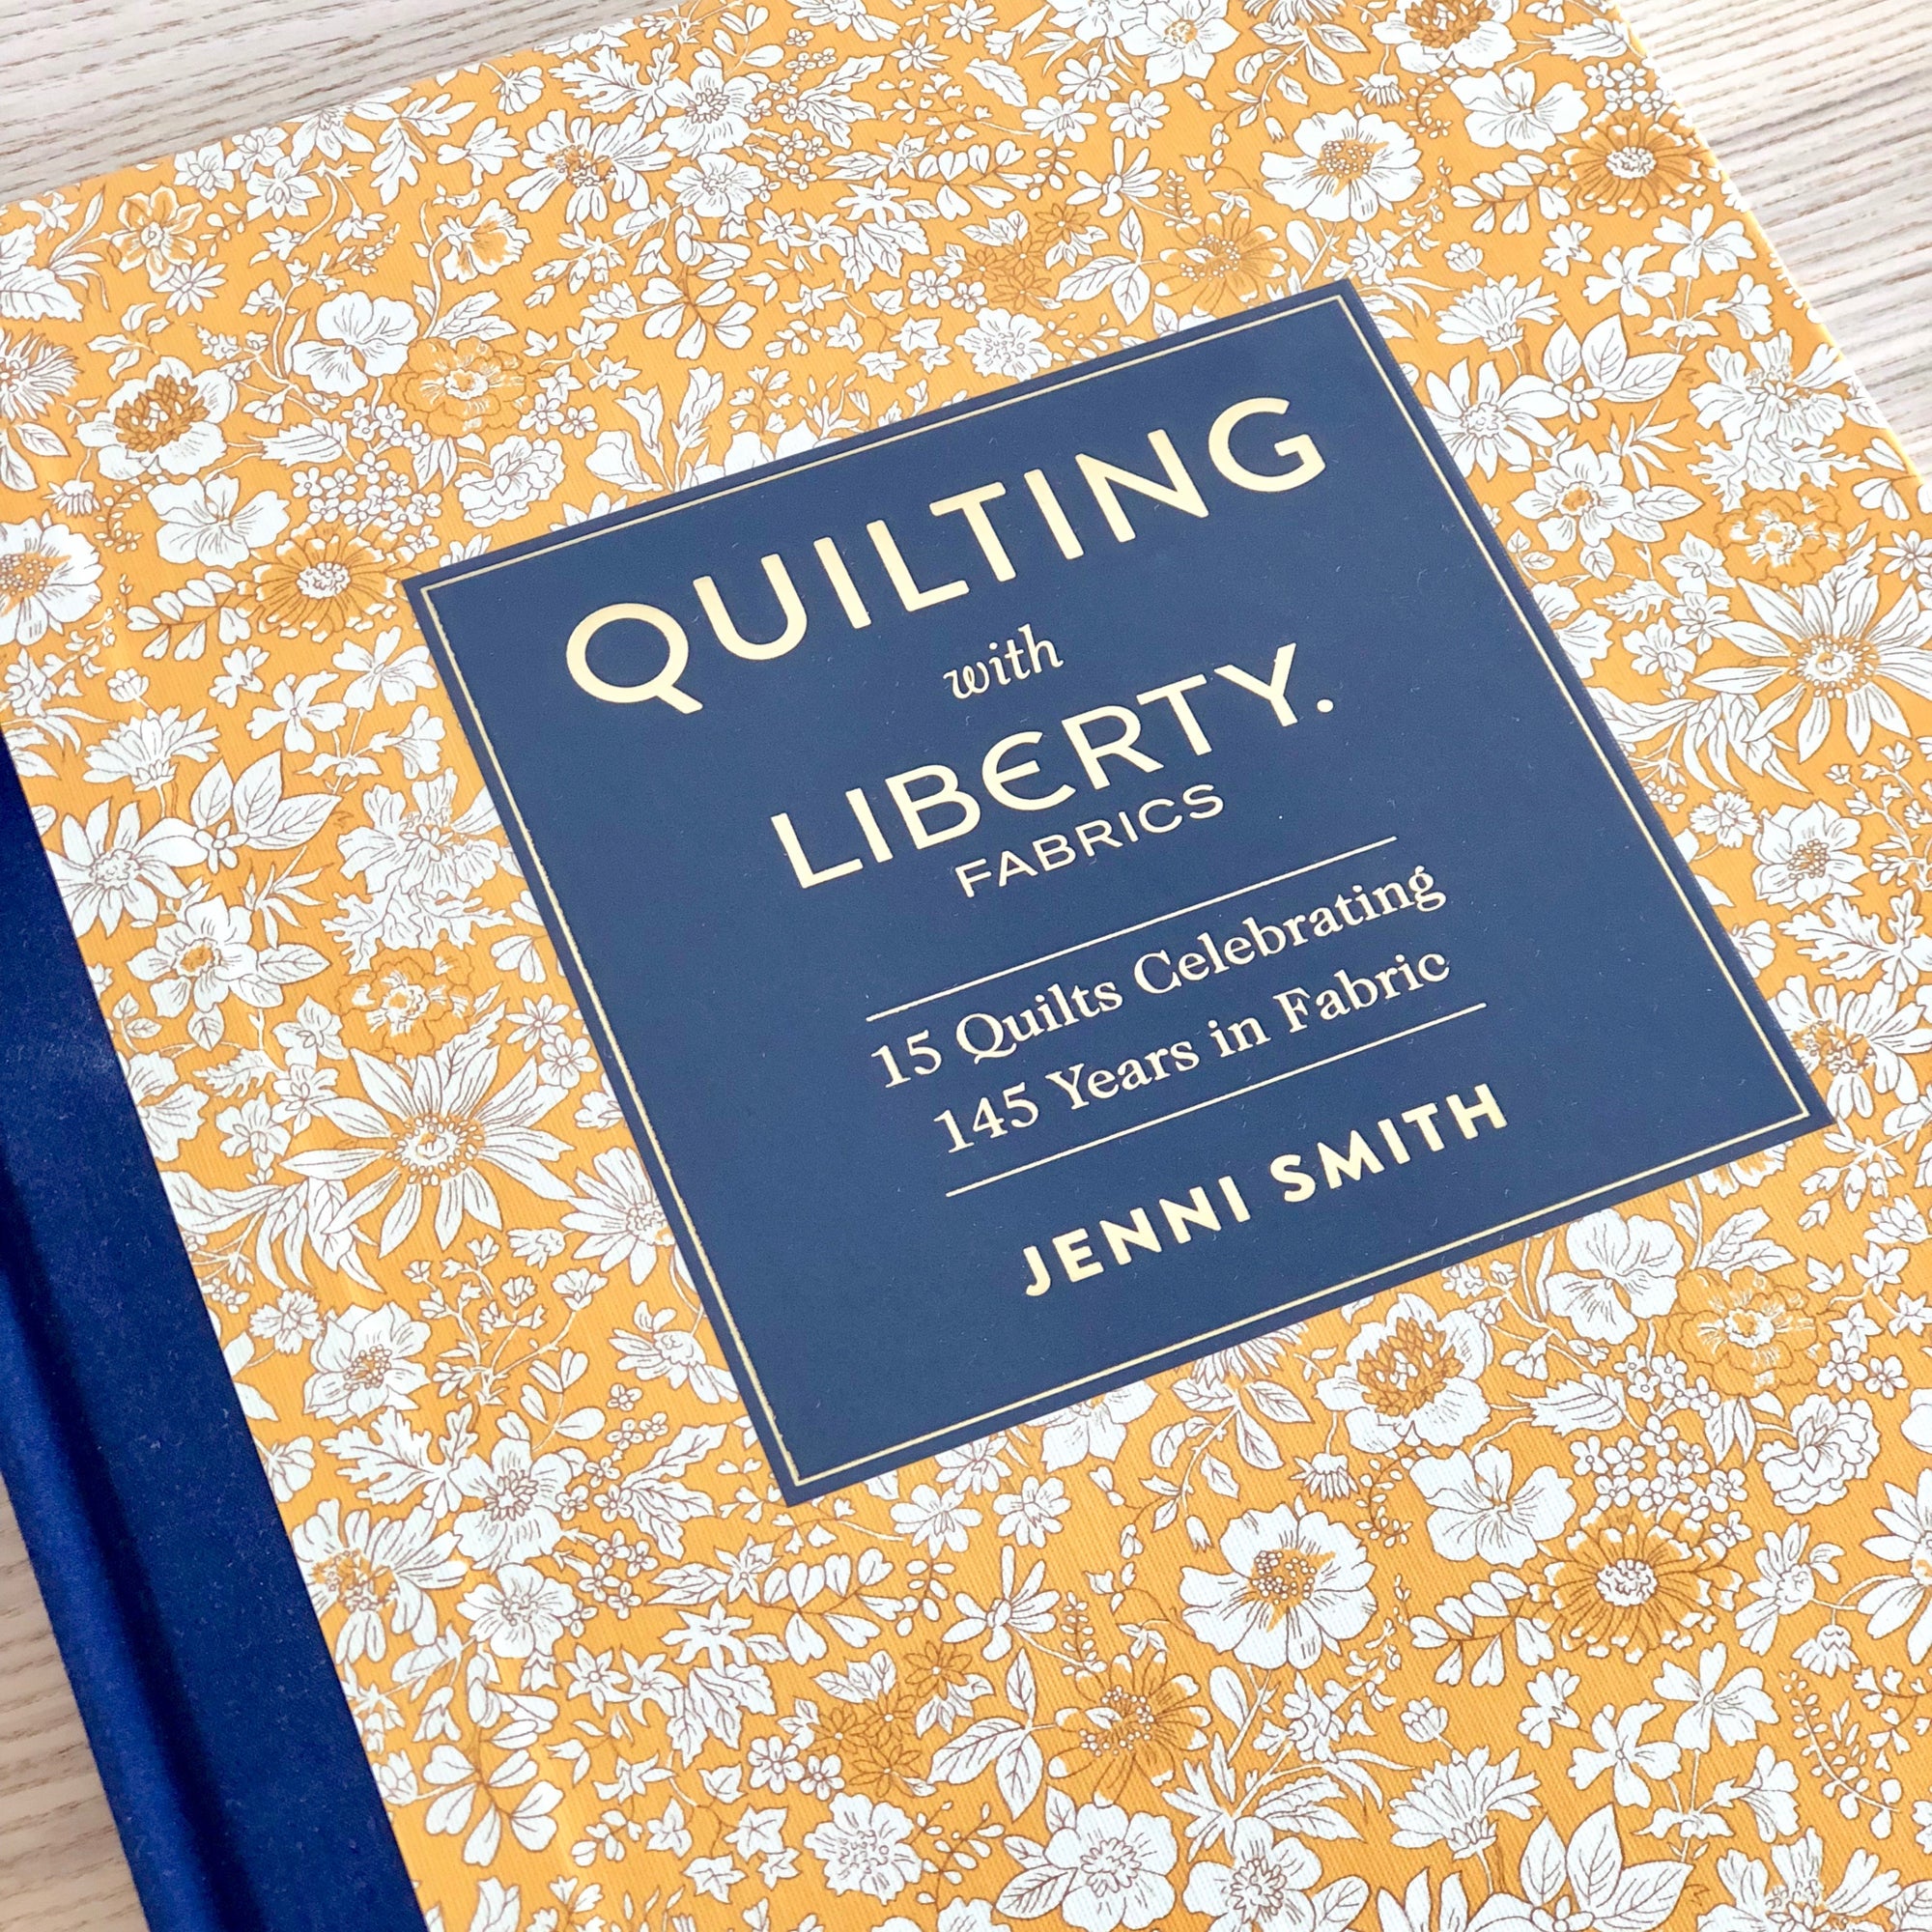 Quilting with Liberty Fabrics